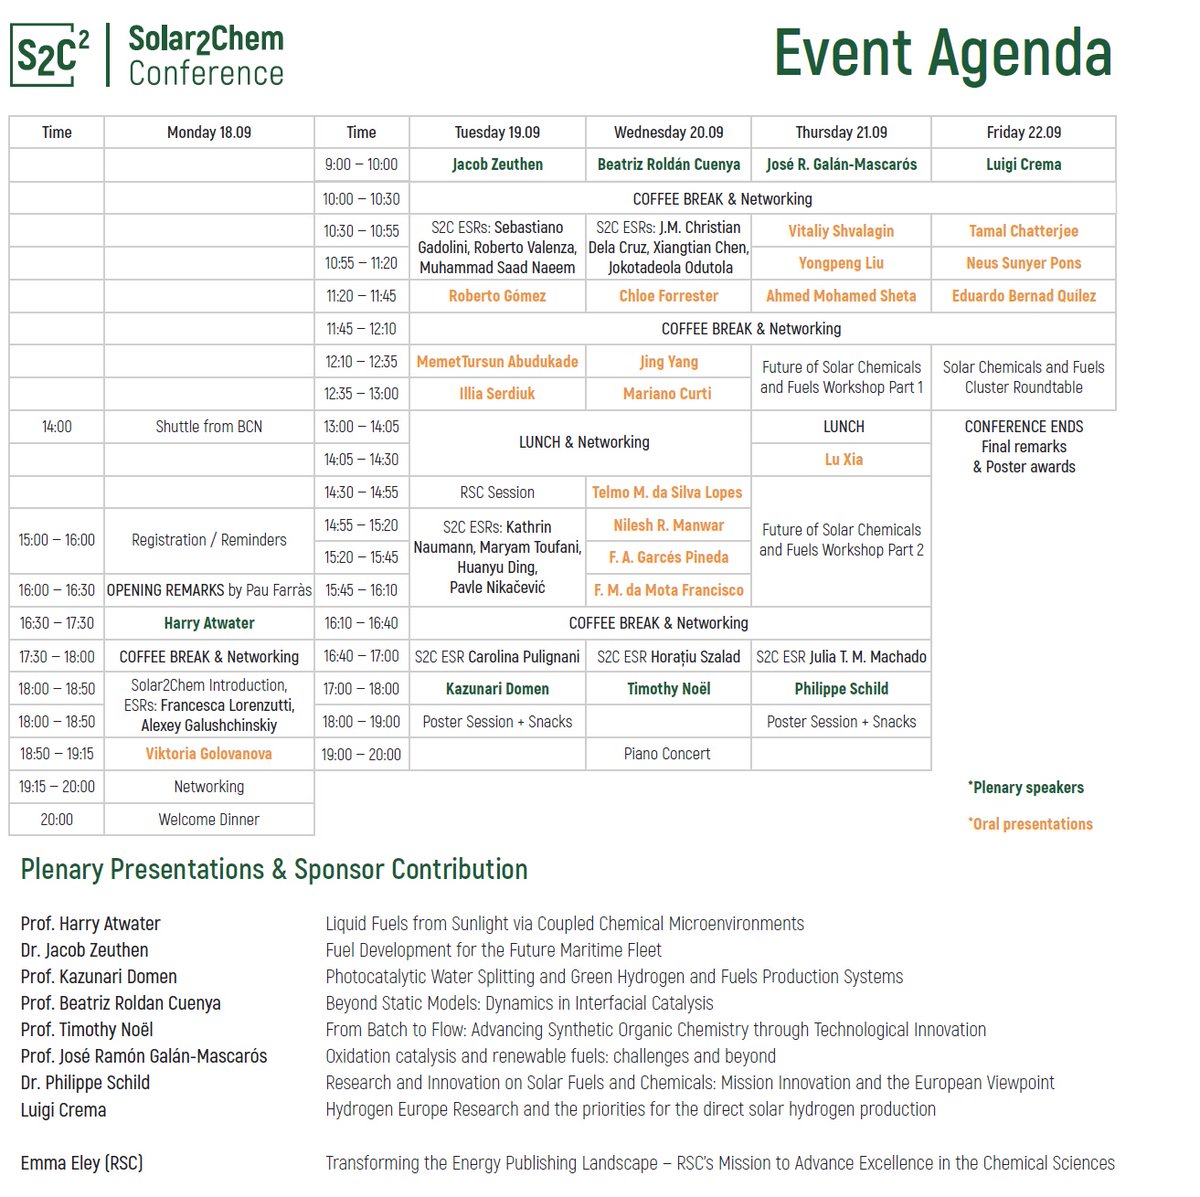 🎉We can't wait to welcome many of you next week at @ICIQchem at our conference! #S2CIC 📰Have a look at the final agenda and get ready for groundbreaking research, engaging workshops, roundtable discussions, and networking sessions! More info at solar2chemconference.com